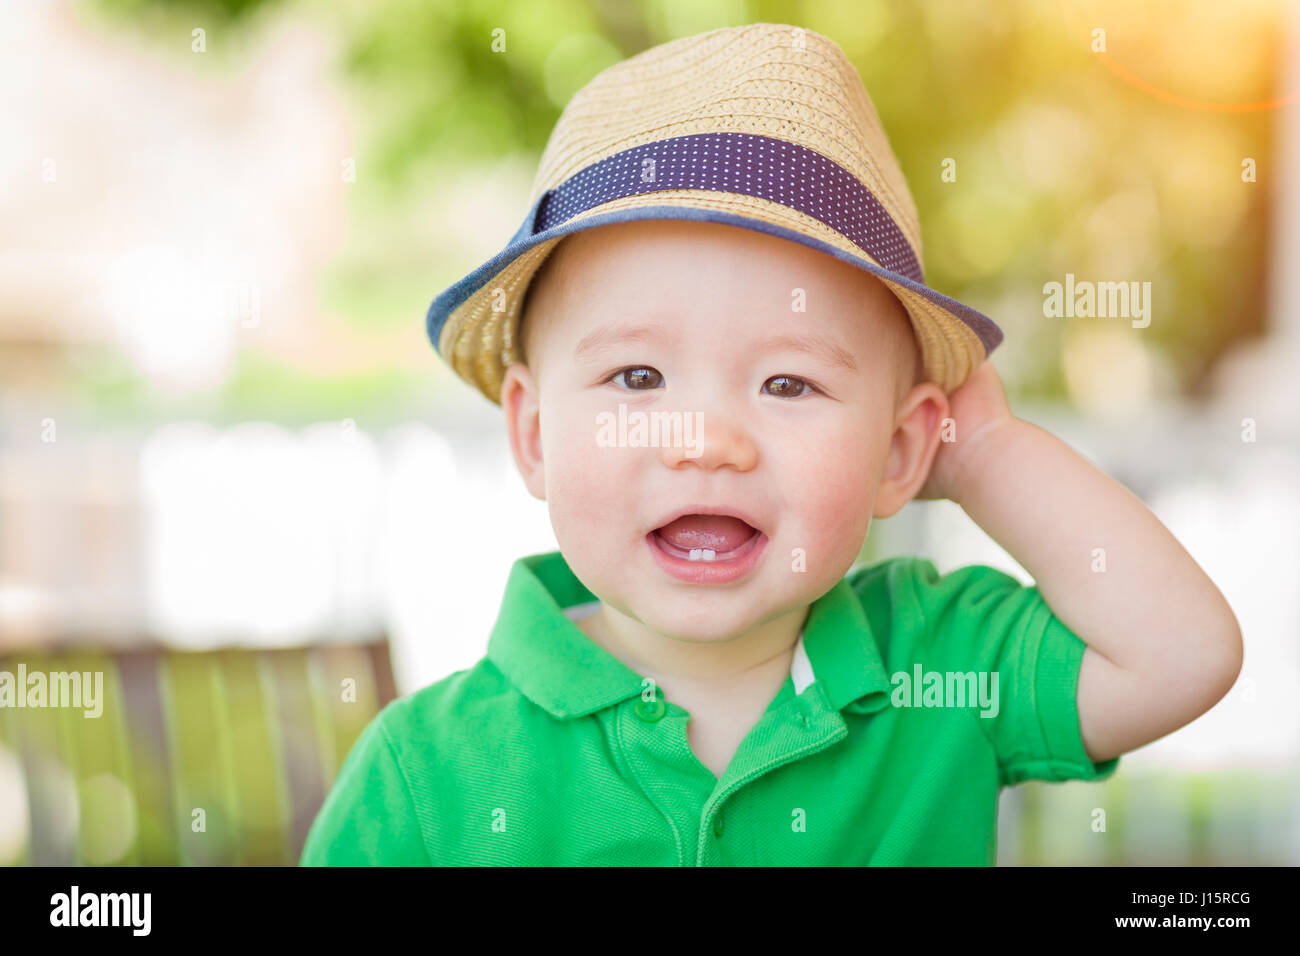 Portrait of A Happy Mixed Race Chinese and Caucasian Baby Boy Wearing His Hat Stock Photo